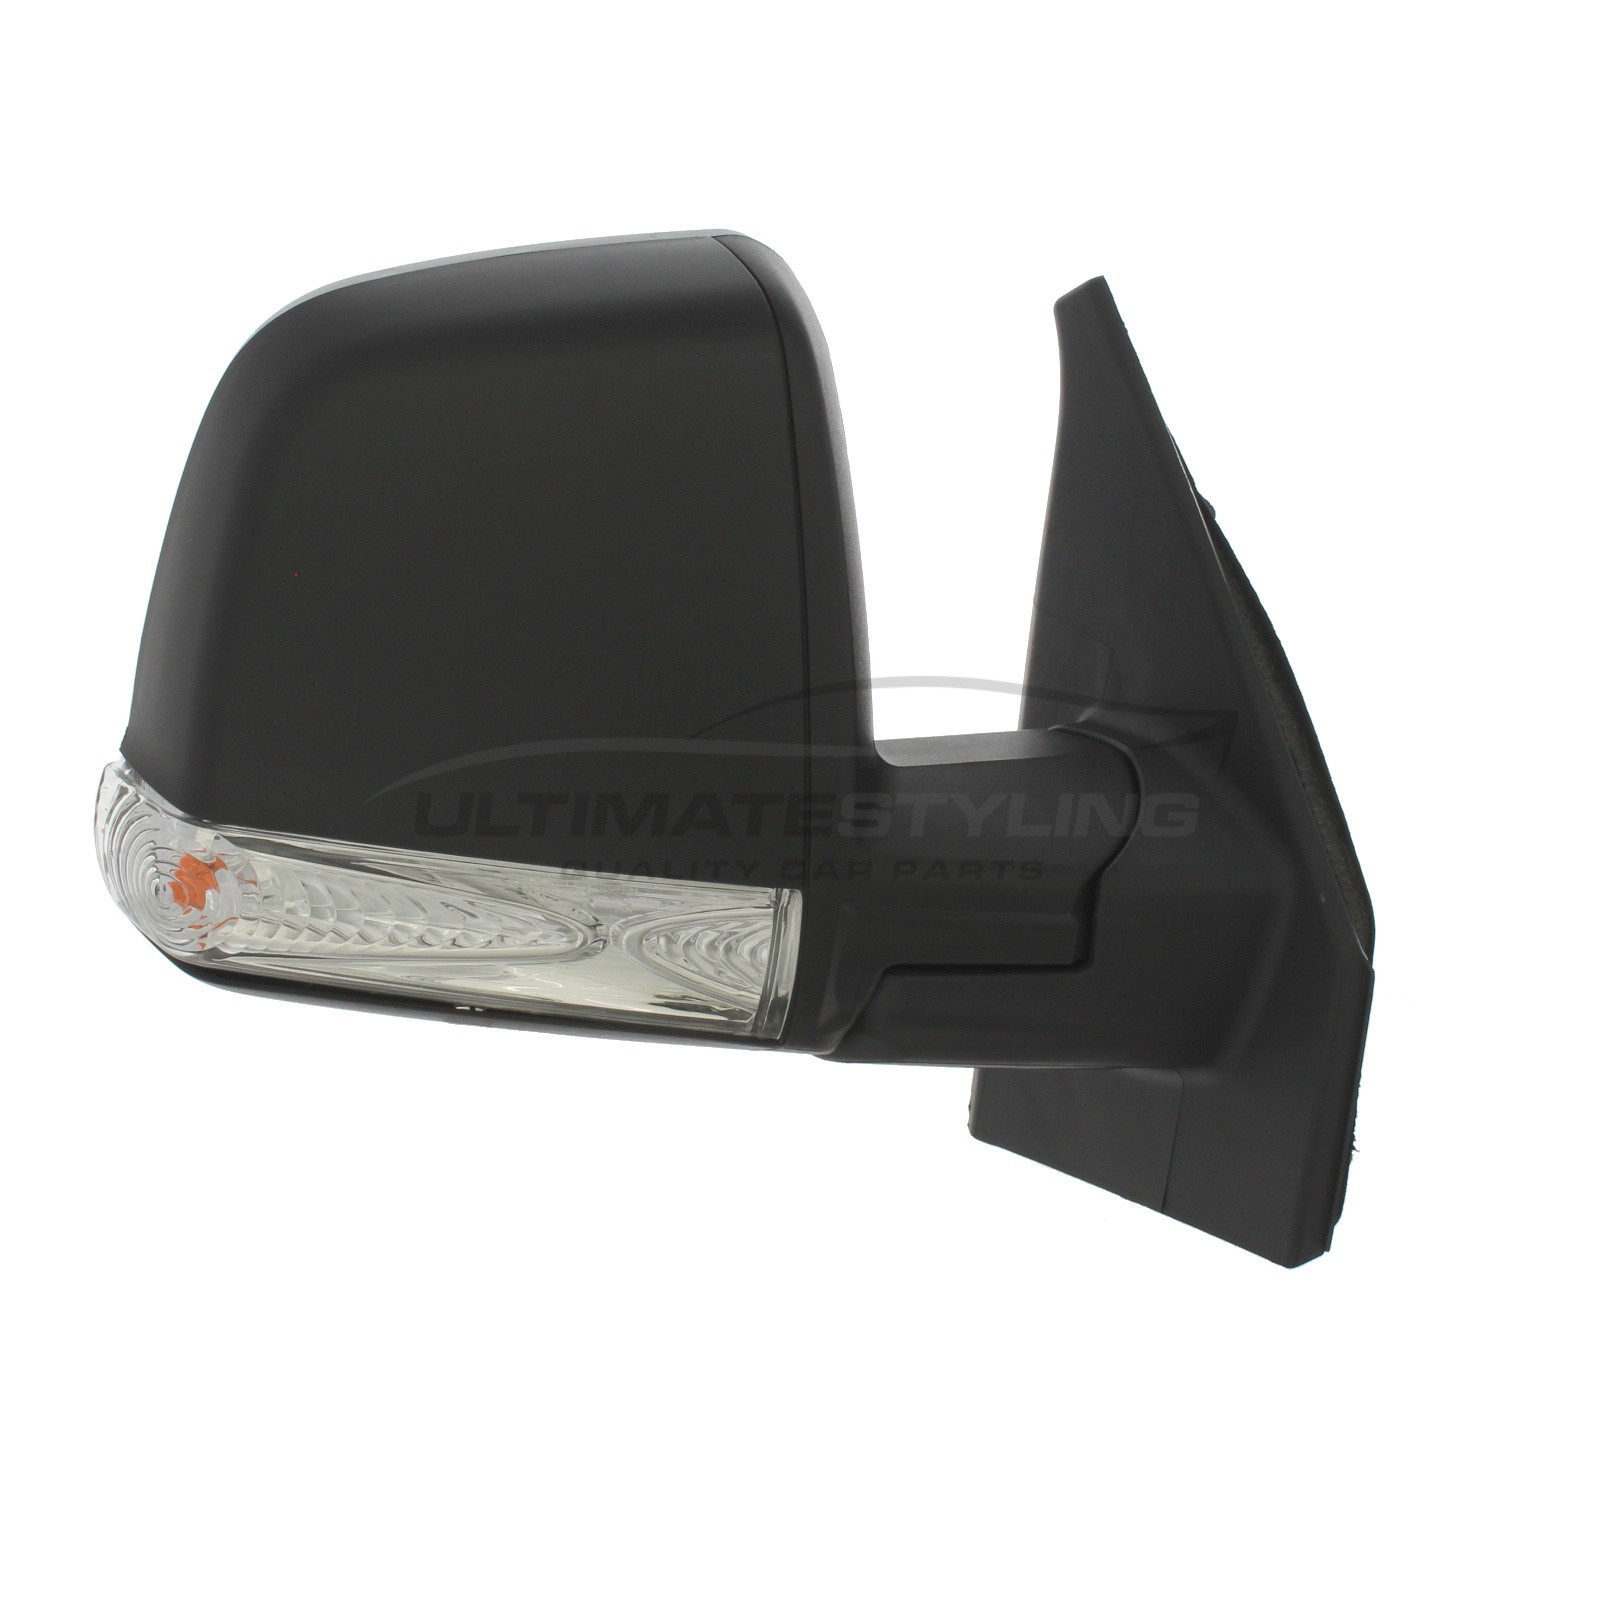 Fiat Doblo, Vauxhall Combo Wing Mirror / Door Mirror - Drivers Side (RH) - Cable adjustment - Non-Heated Glass - Indicator - Black - Textured